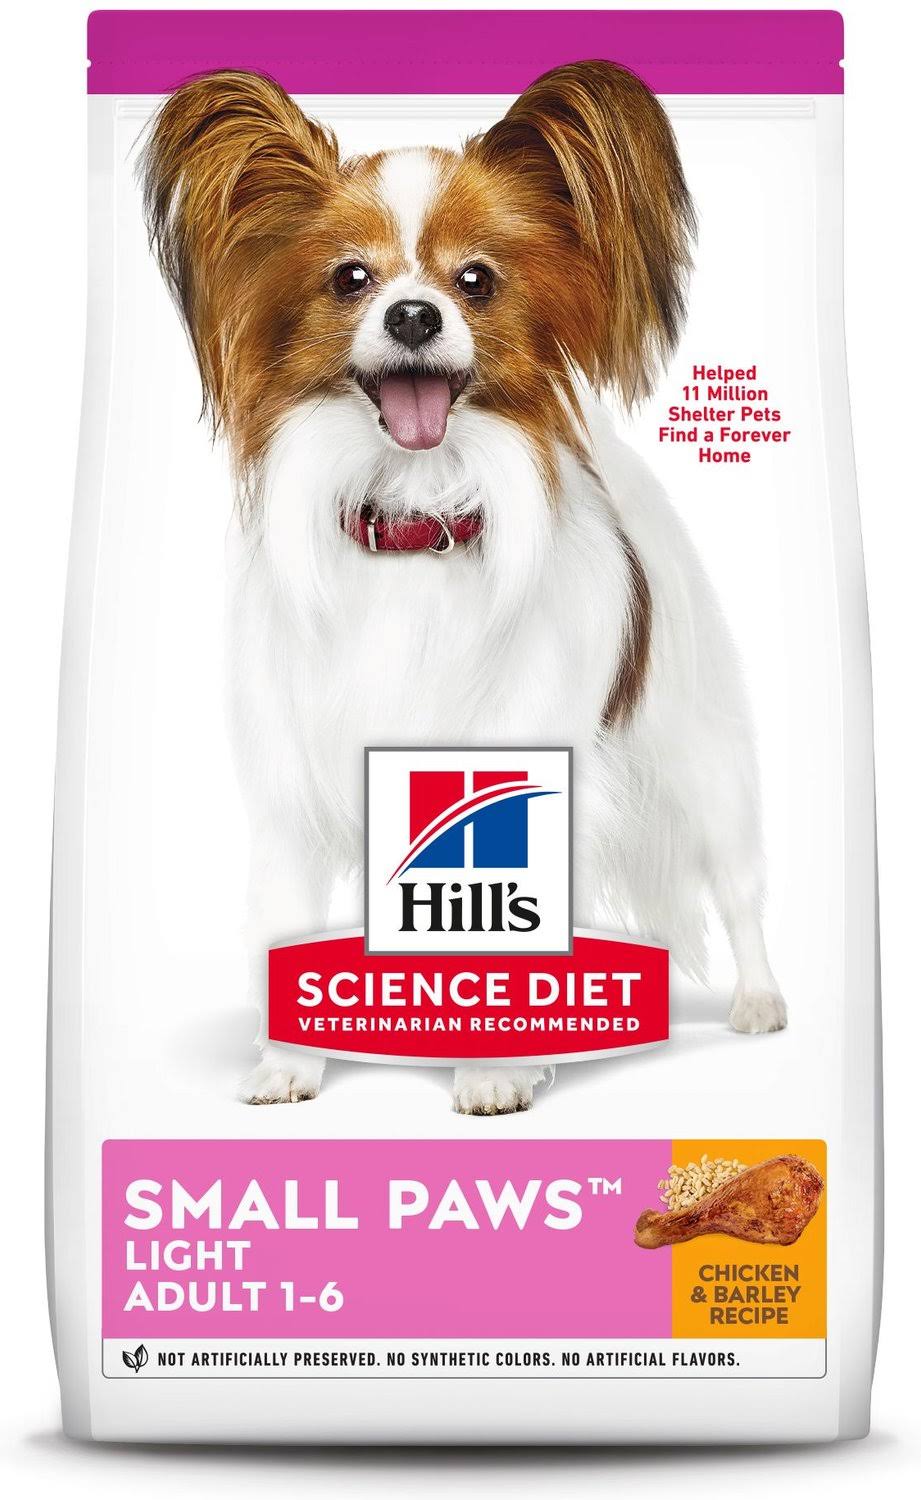 Hill's Science Diet Premium Natural Dog Food - Chicken Meal and Barley, 15.5lbs